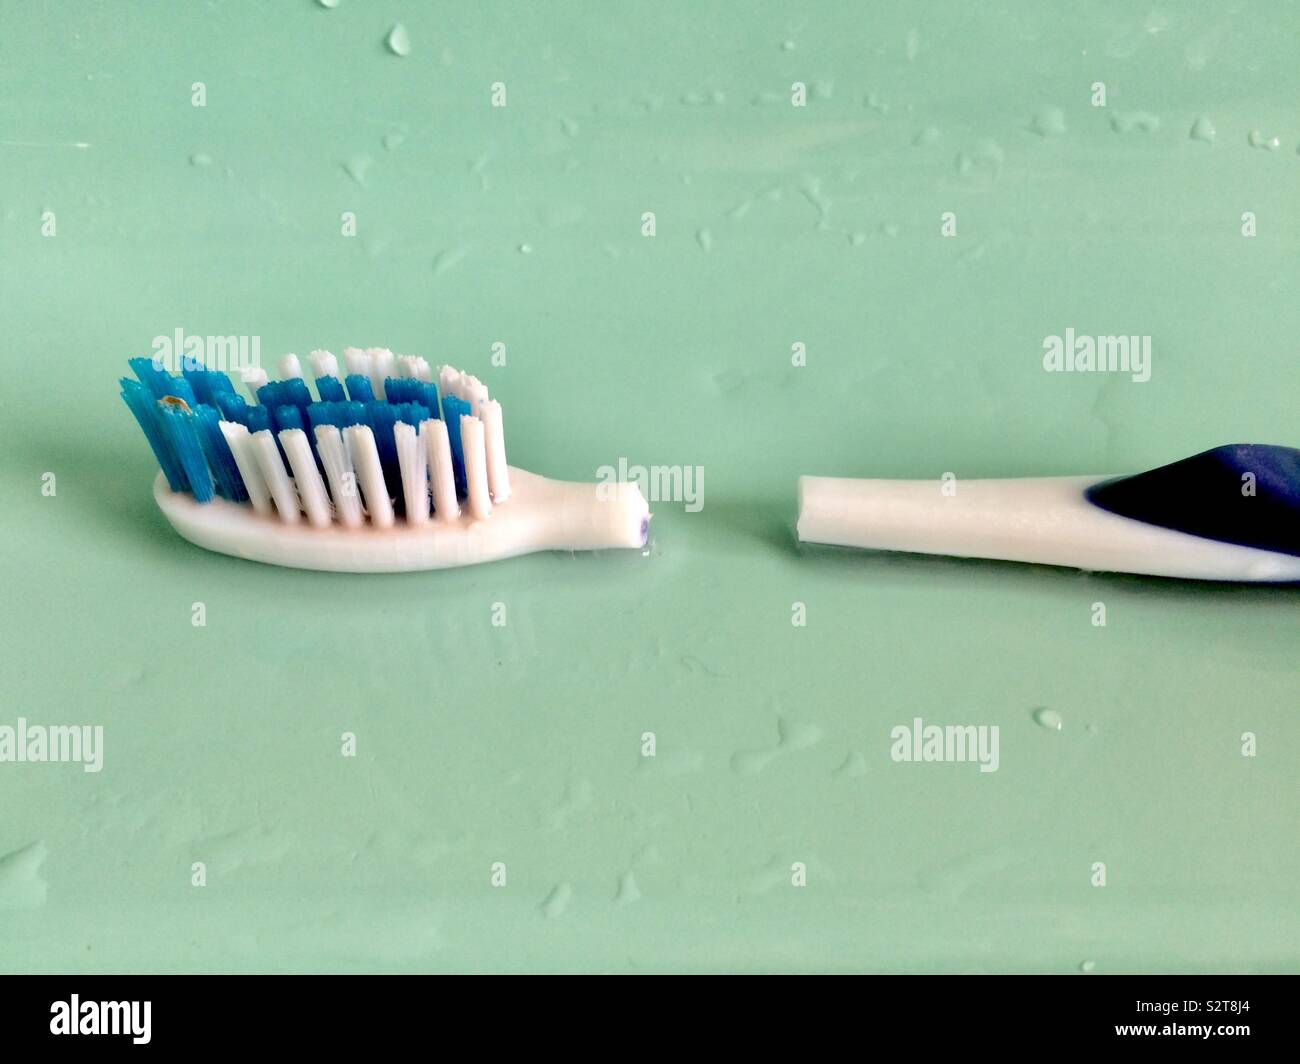 Snapped toothbrush Stock Photo